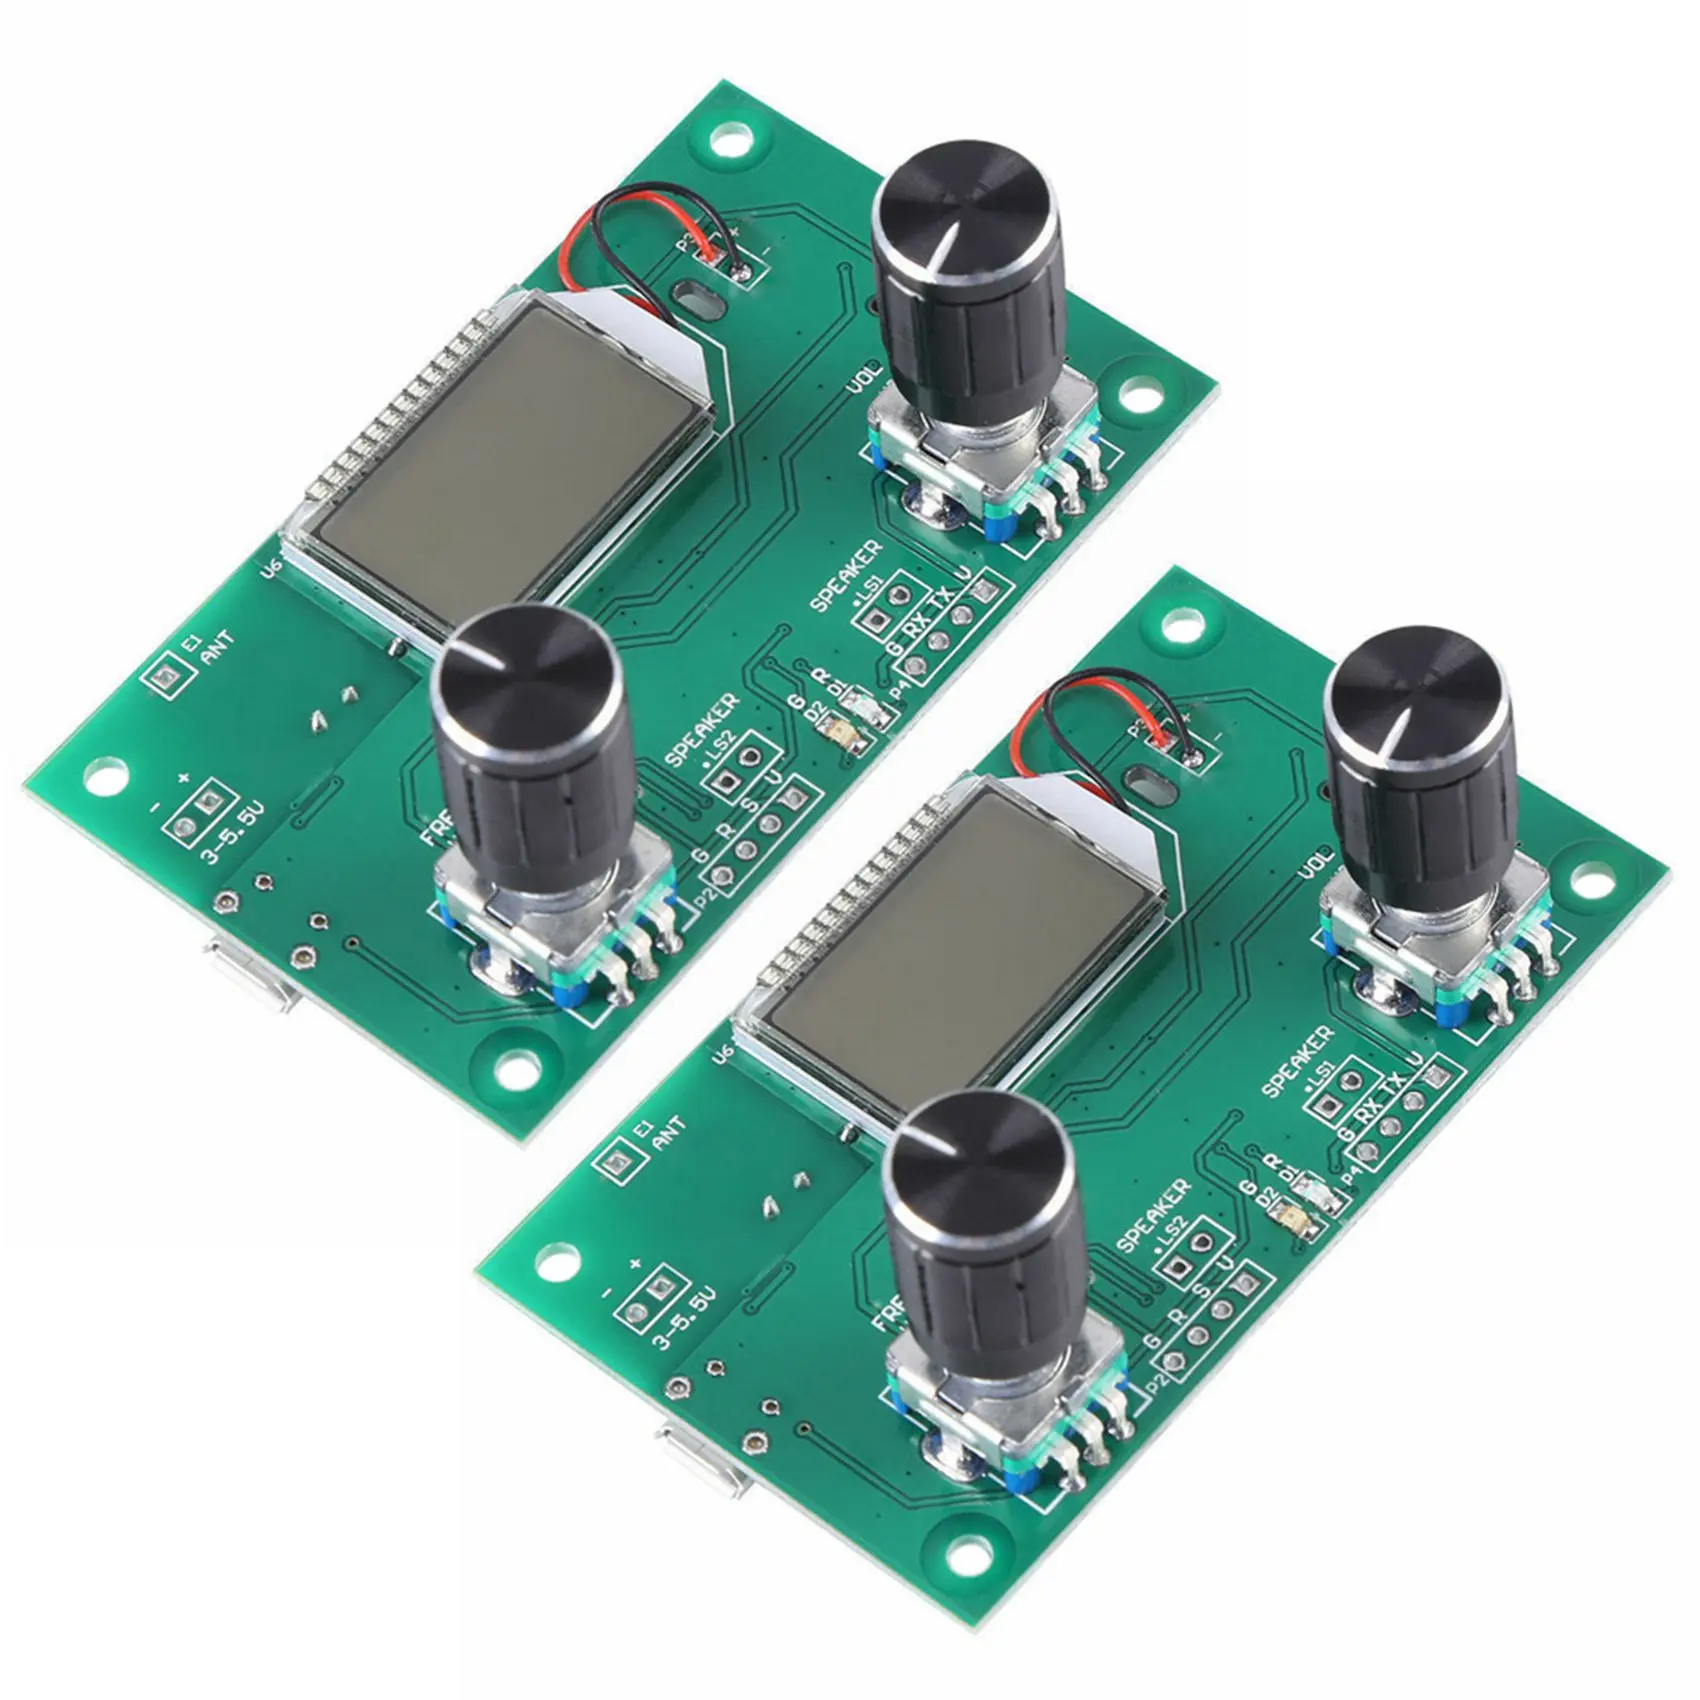 

2X FM Radio Receiver Module 87-108MHz Frequency Modulation Stereo Receiving Board with LCD Digital Display 3-5V DSP PLL